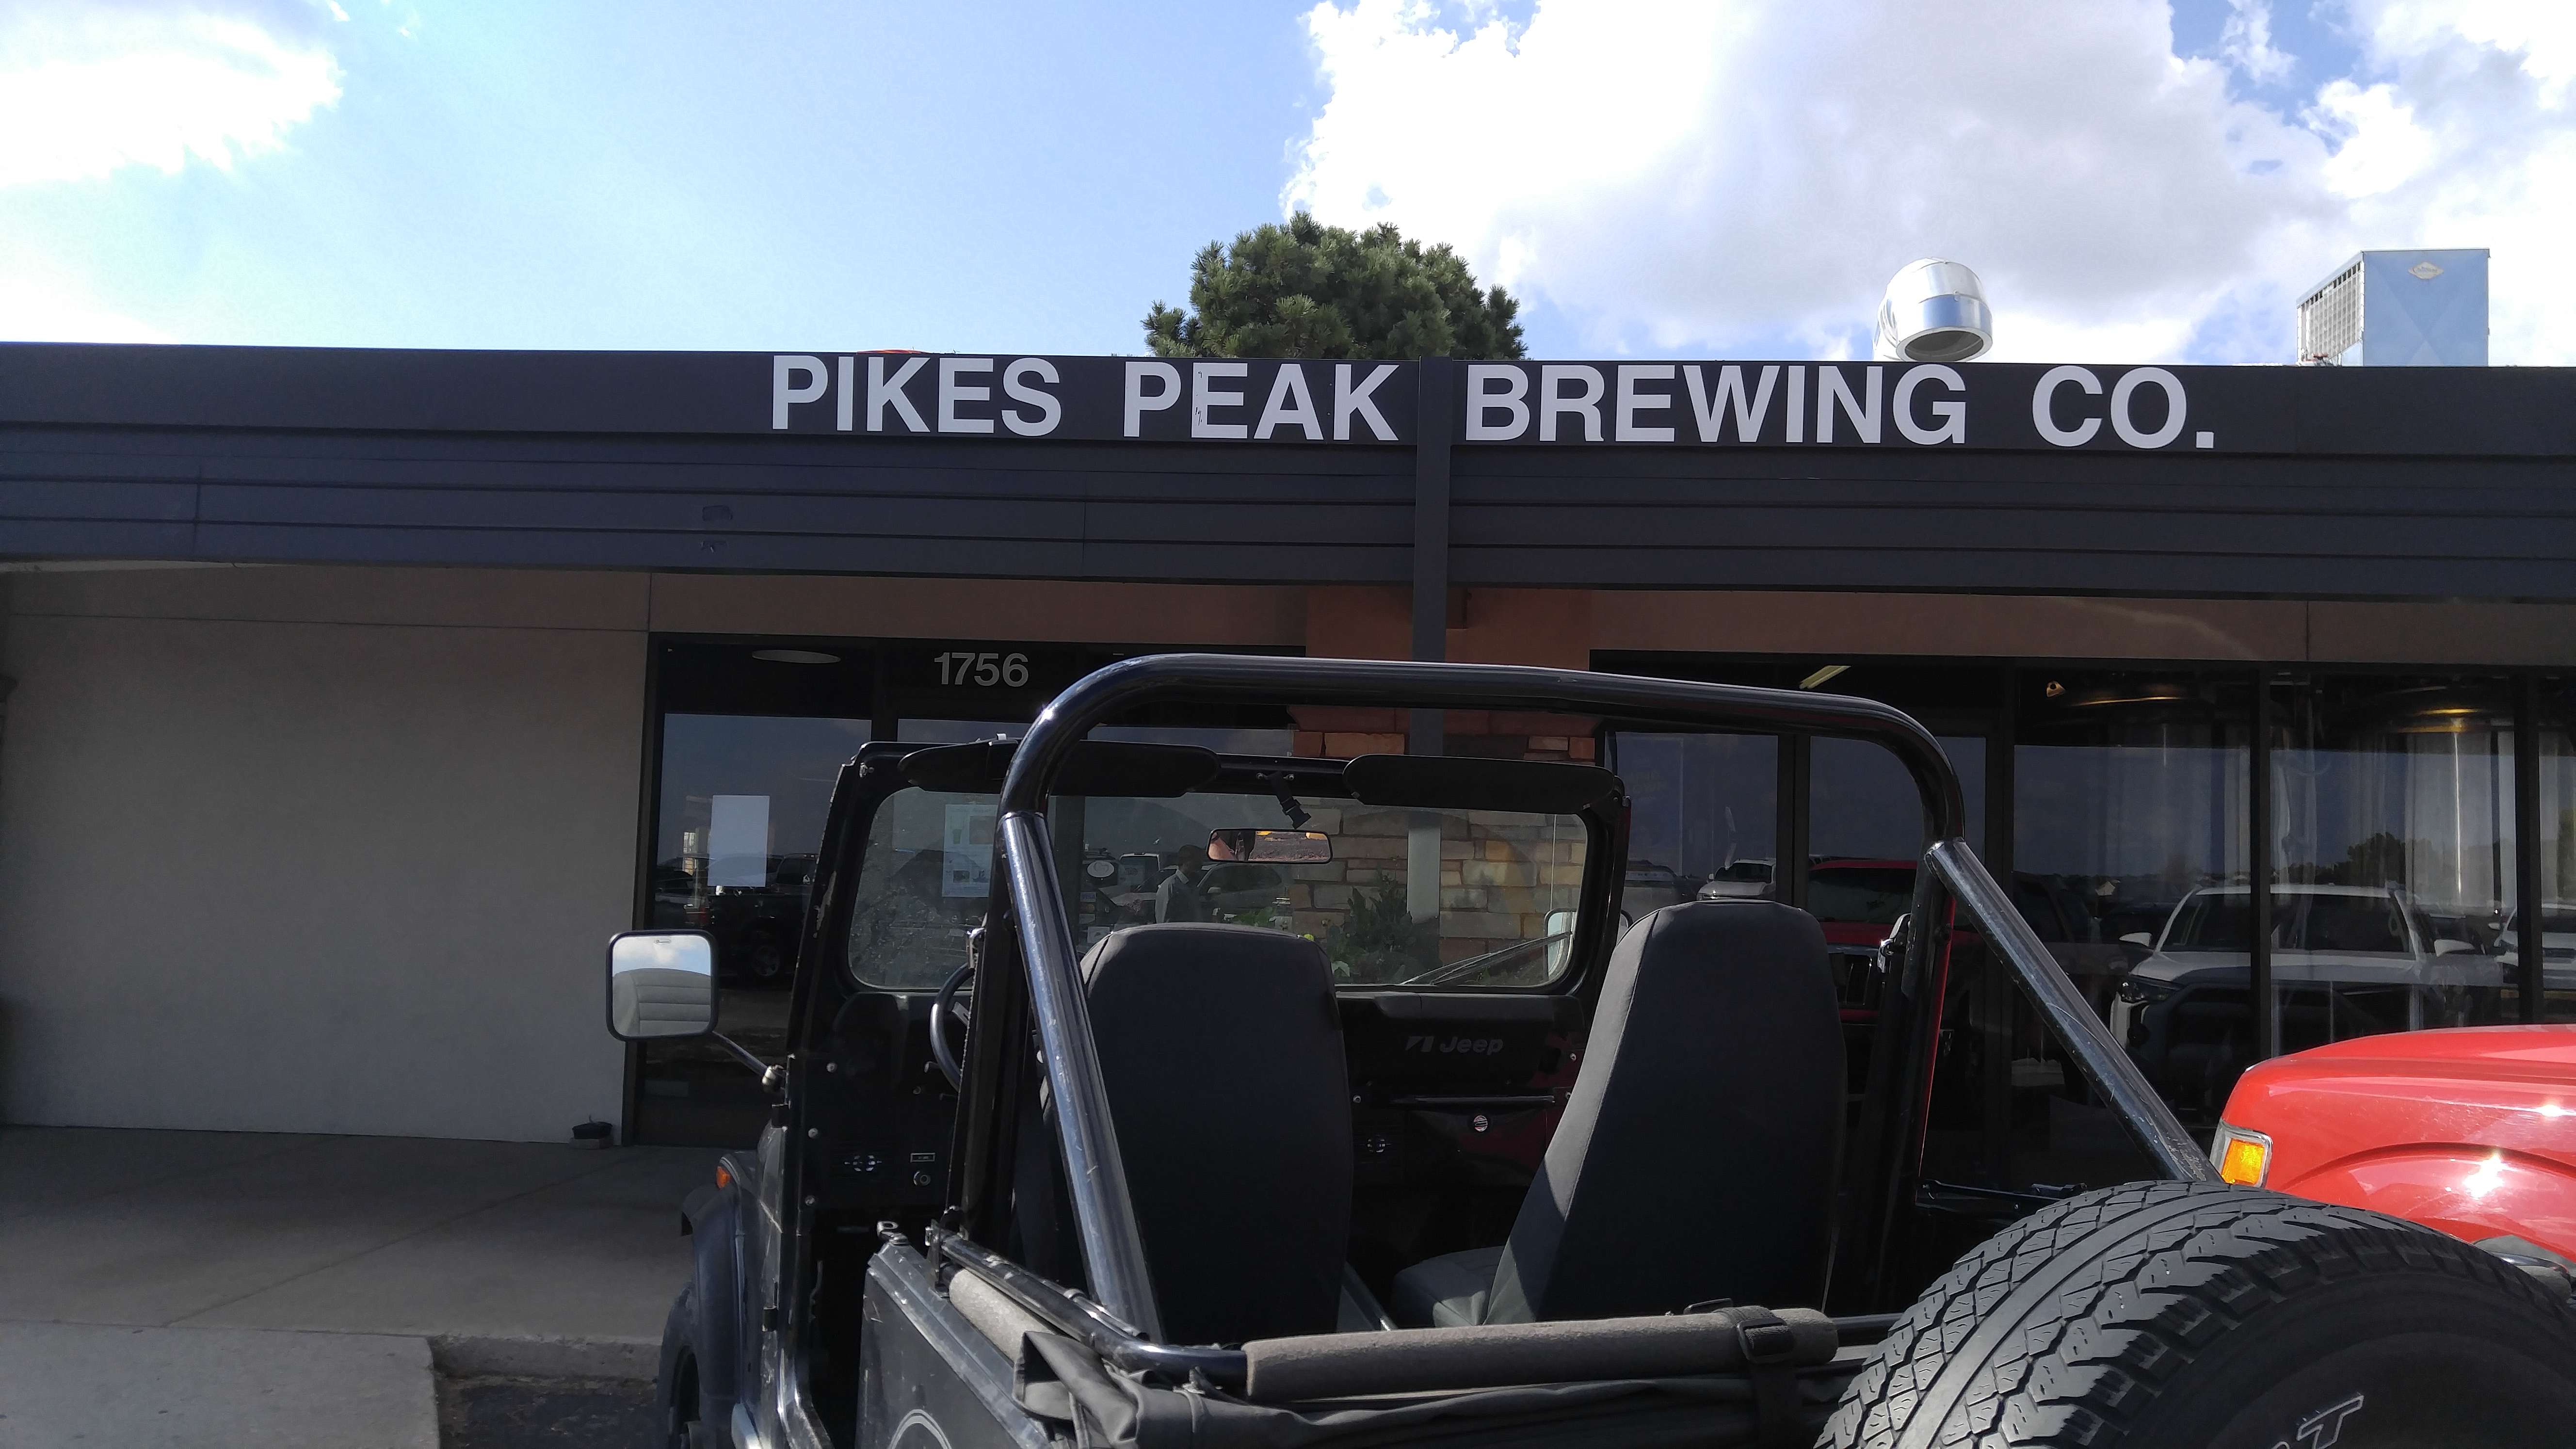 A bad picture of Pikes Peak Brewing